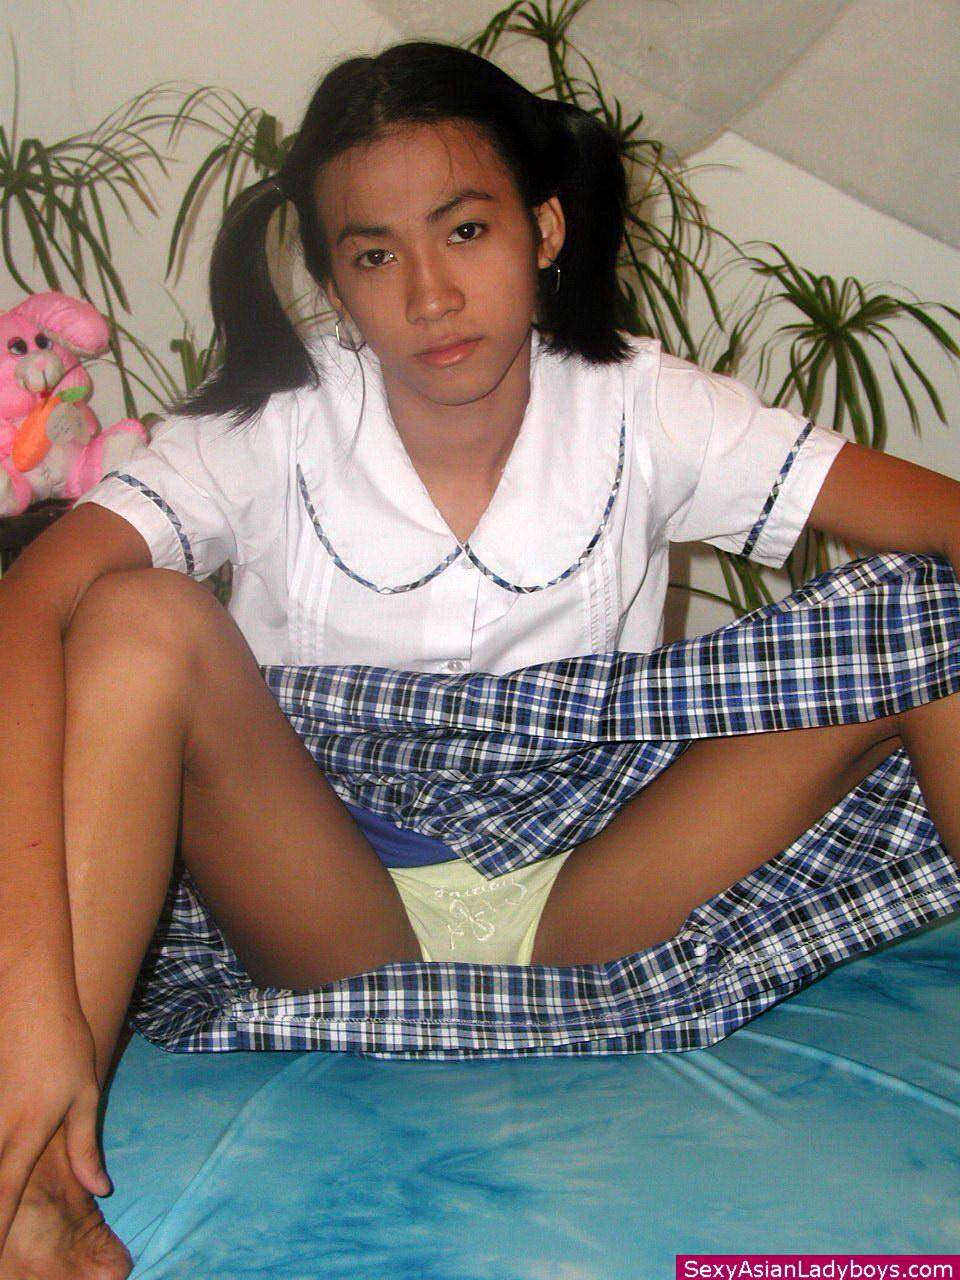 Small Shemale Stripping From Her School Uniform And Spreading